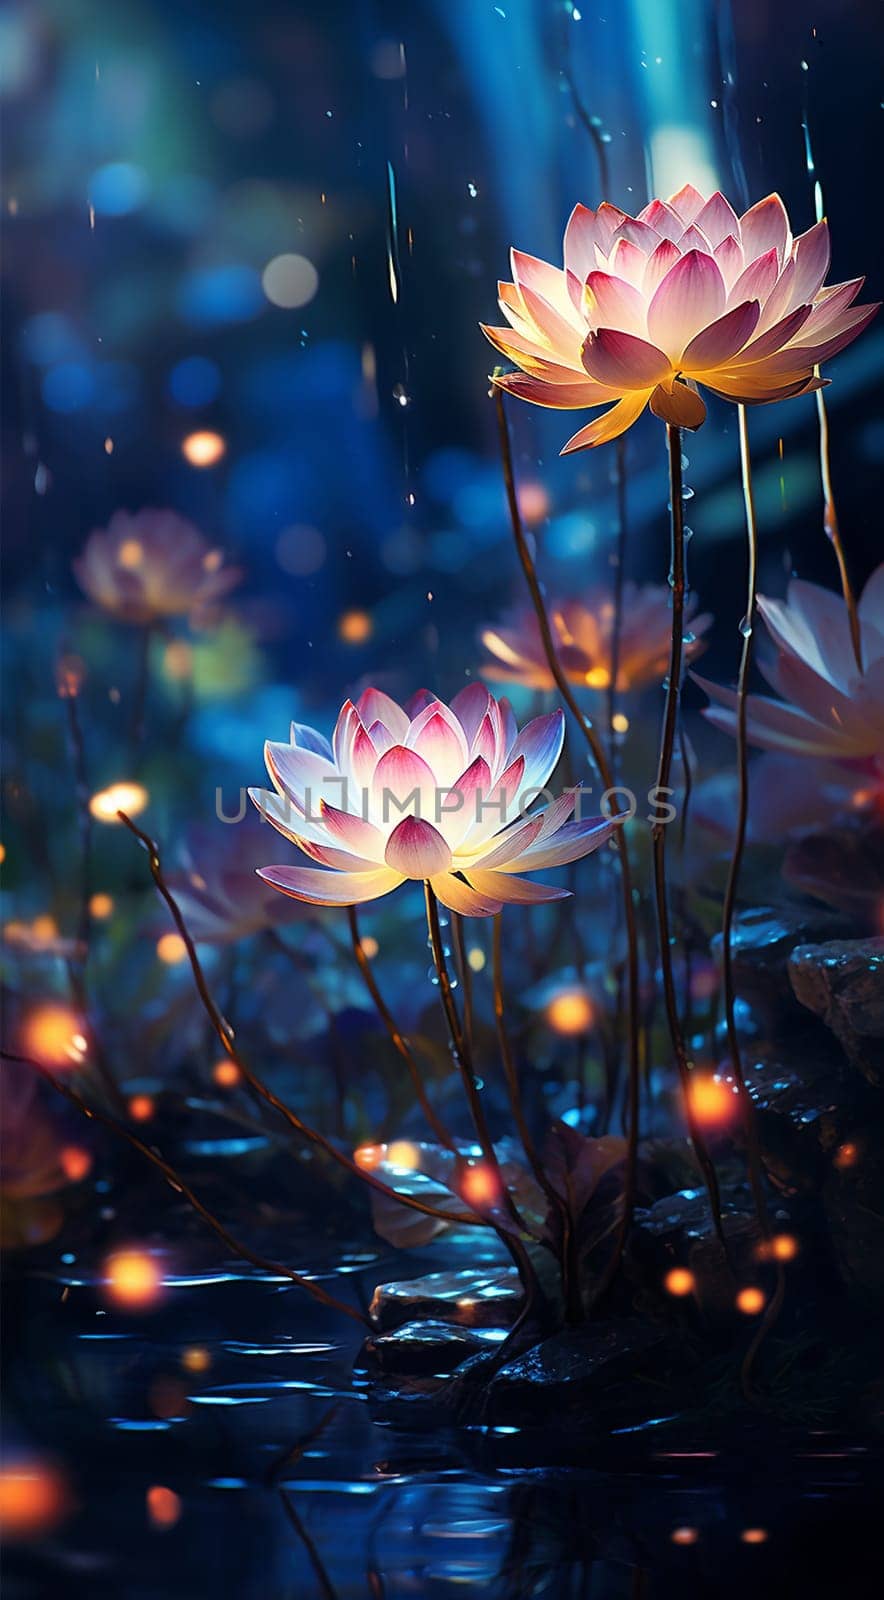 Magical pink water lily by night, lotus flower Orange Sunset in the garden pond. Close-up of Nymphaea reflected in water. Flower landscape for nature wallpaper. Vertical background copy space. Sparkling bokeh lights. Lotus flower magic beauty